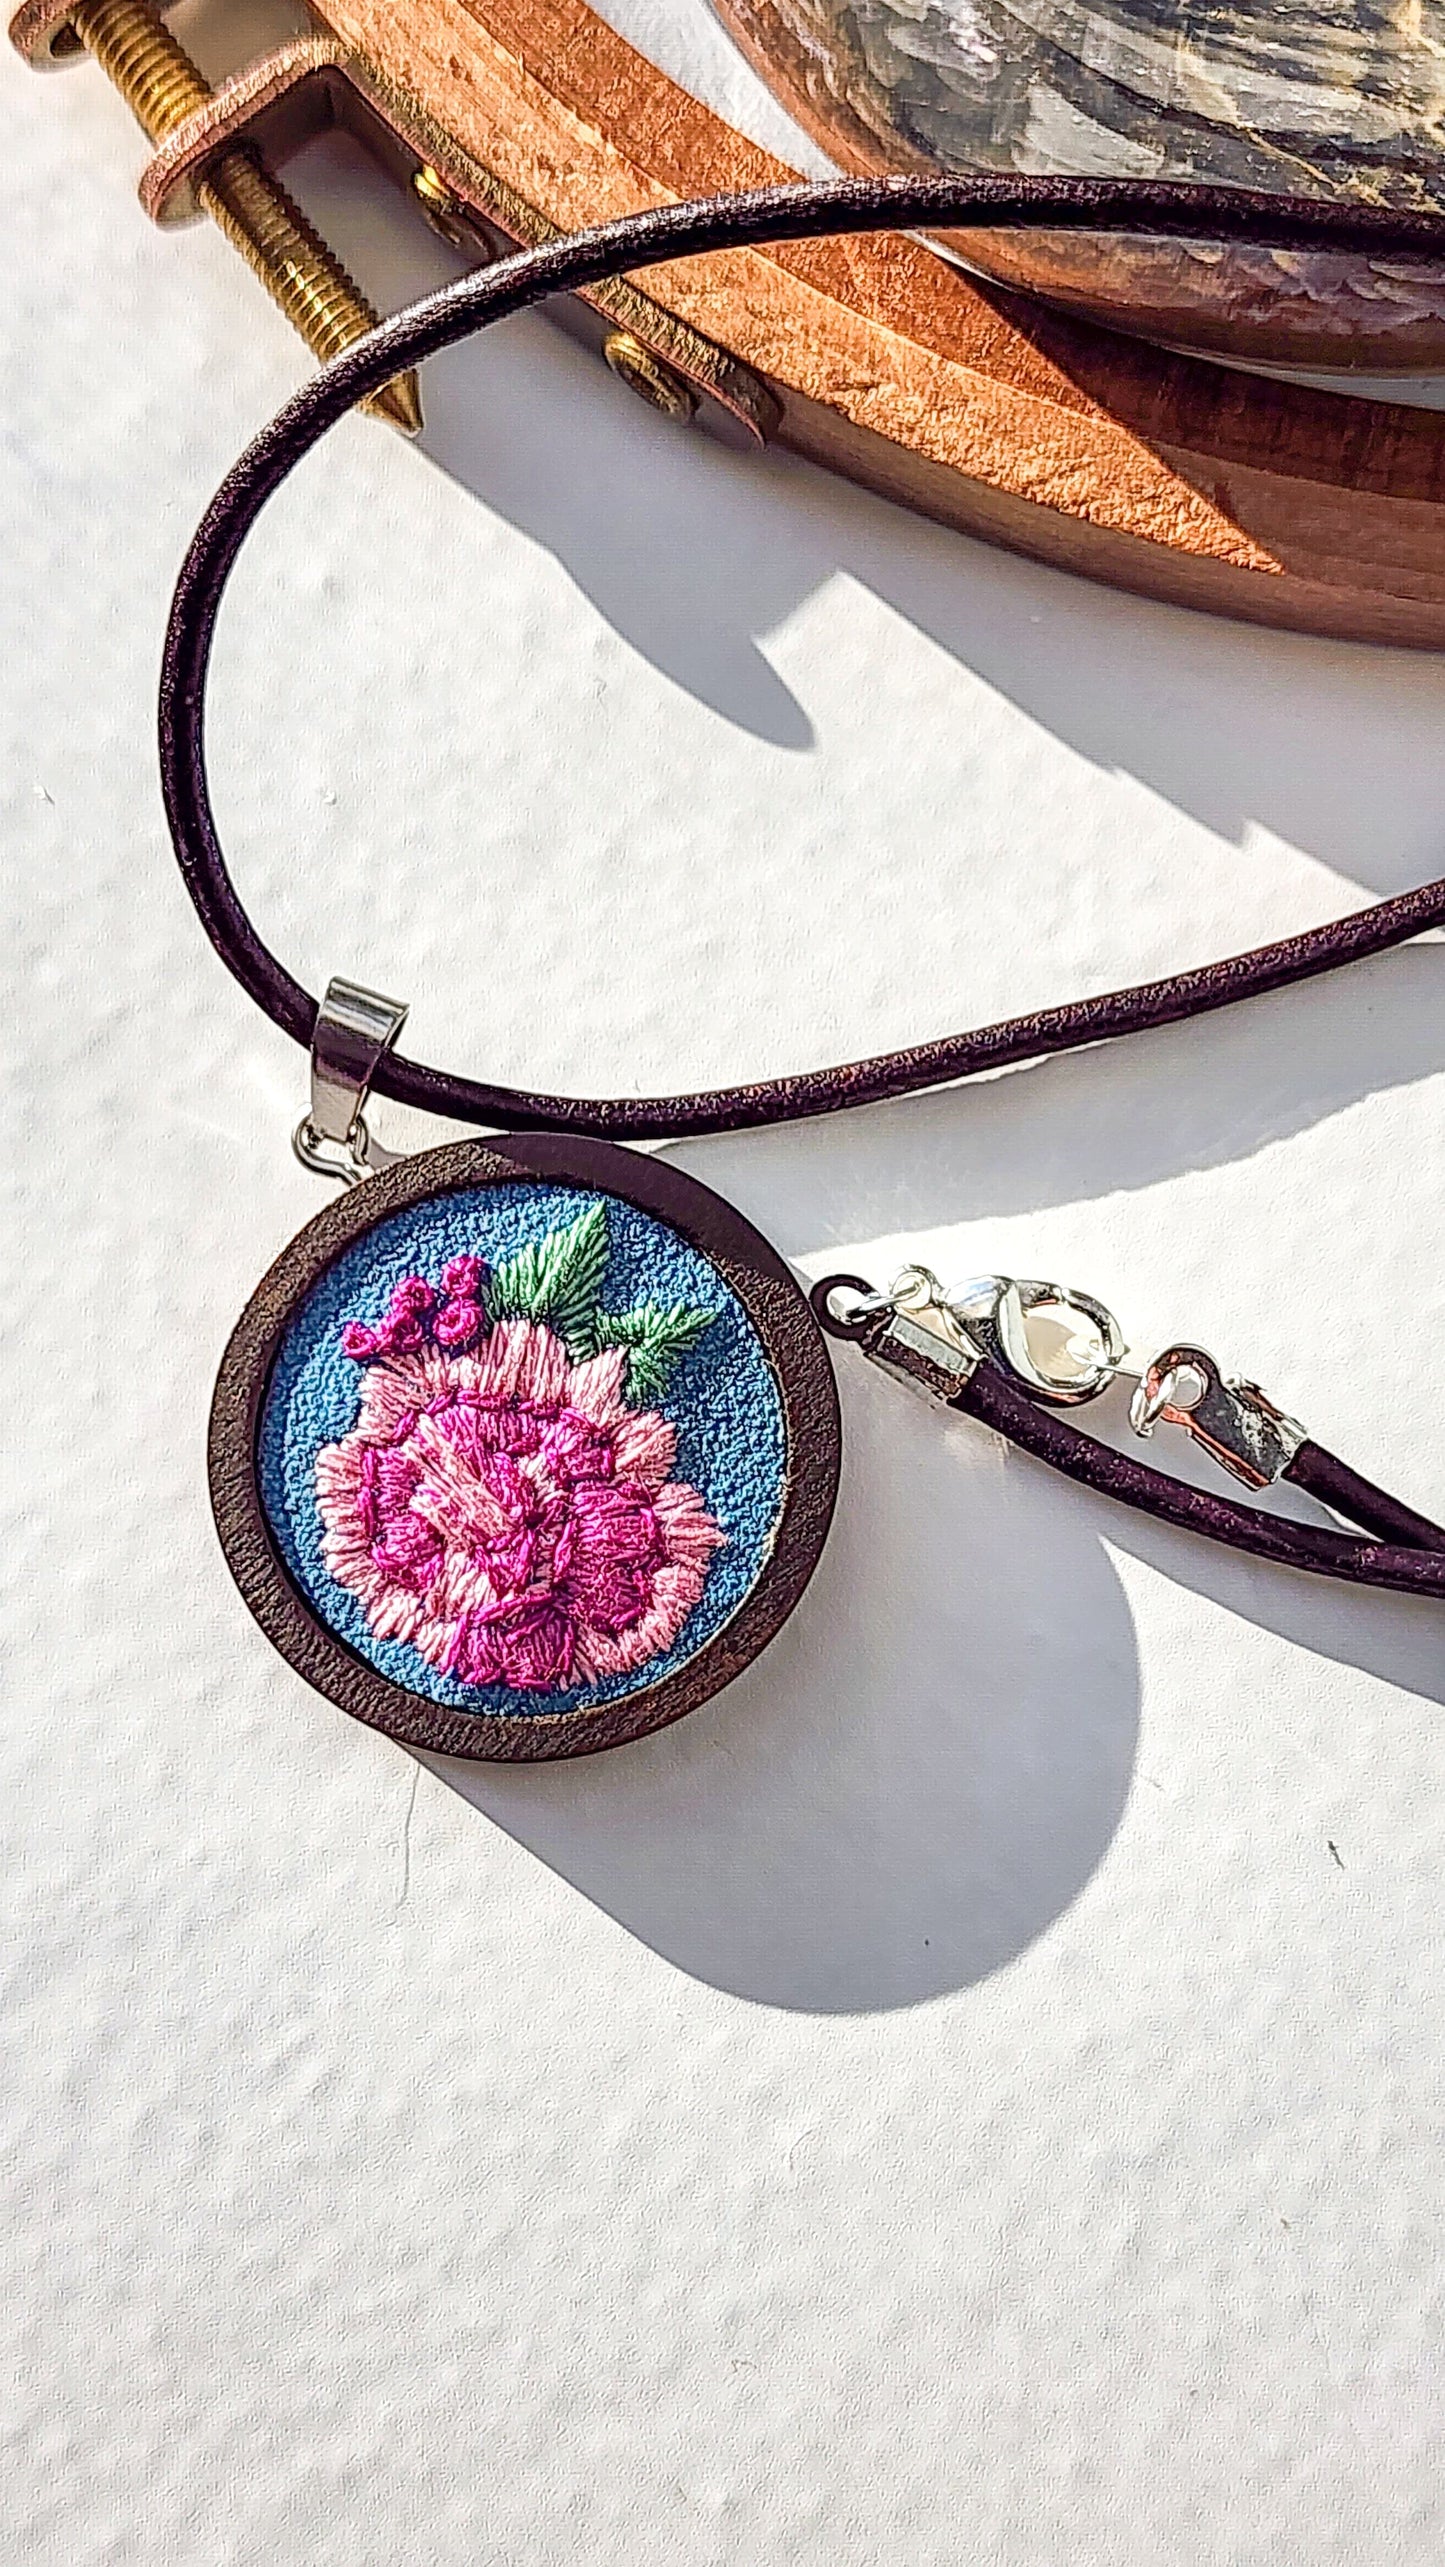 Embrace Embroidery Embroidered Necklace Hand Embroidered Peony Pendant